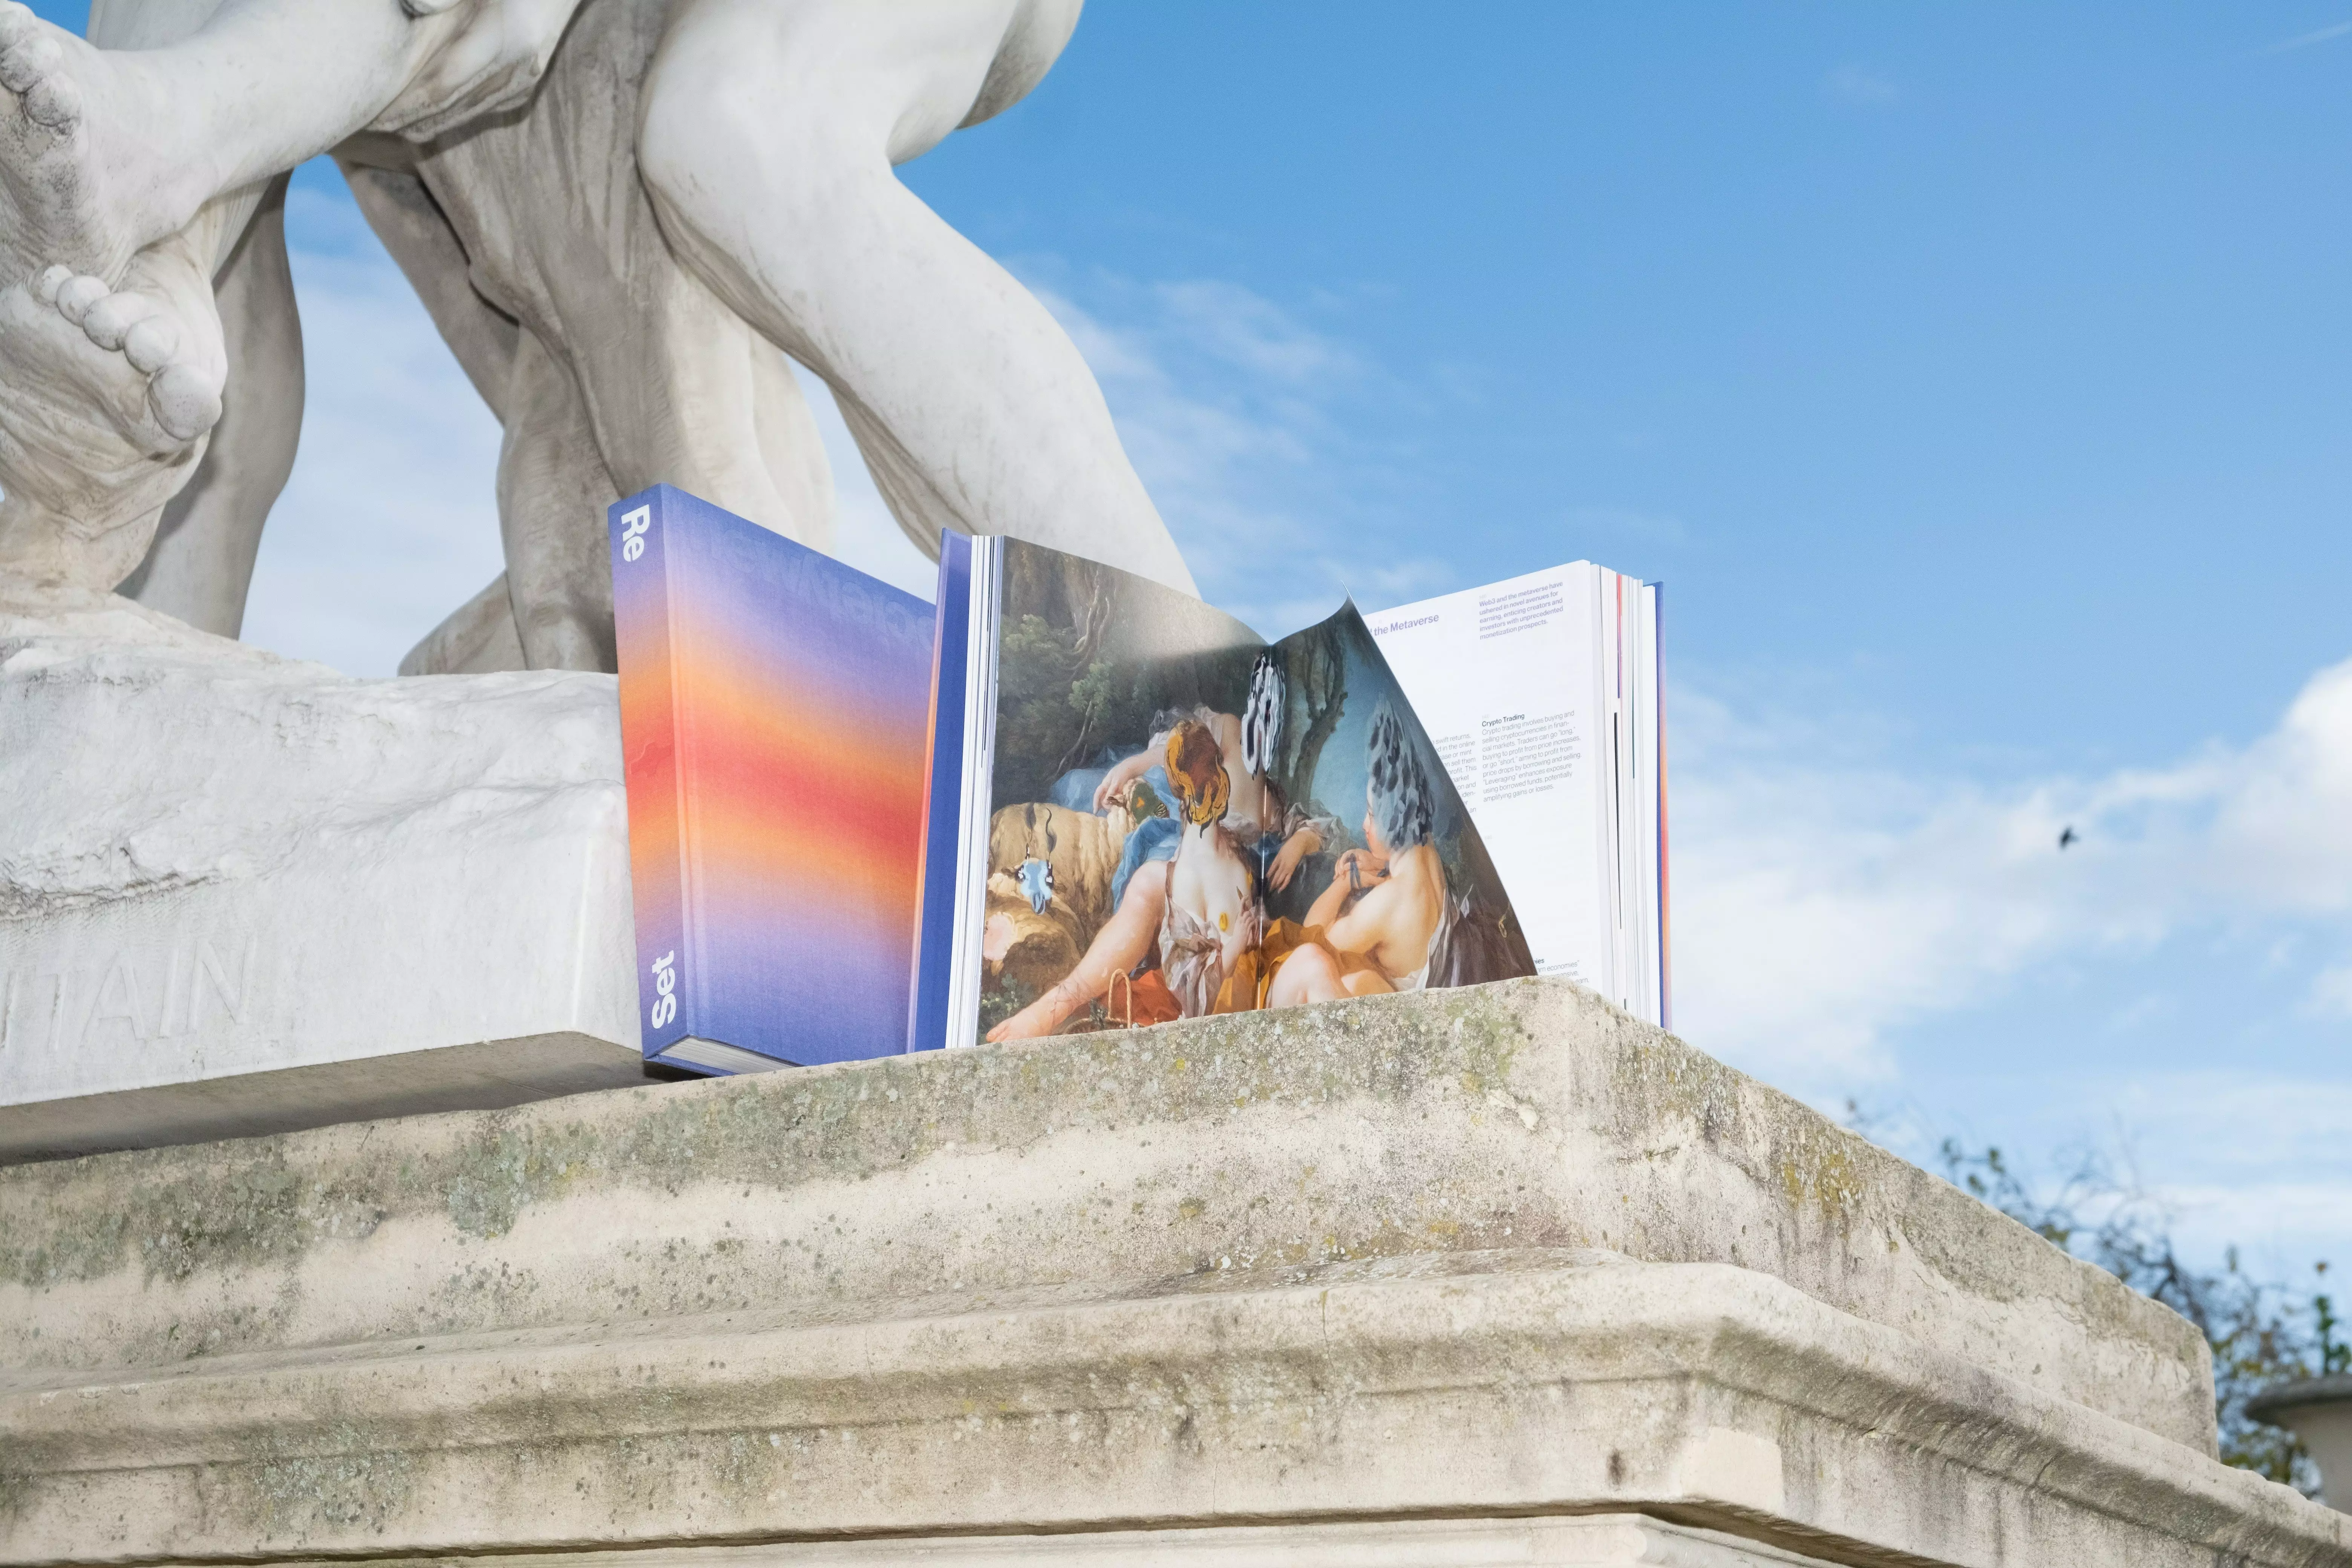 An incredible photograph of the New Society book in a stylized manner under a statue